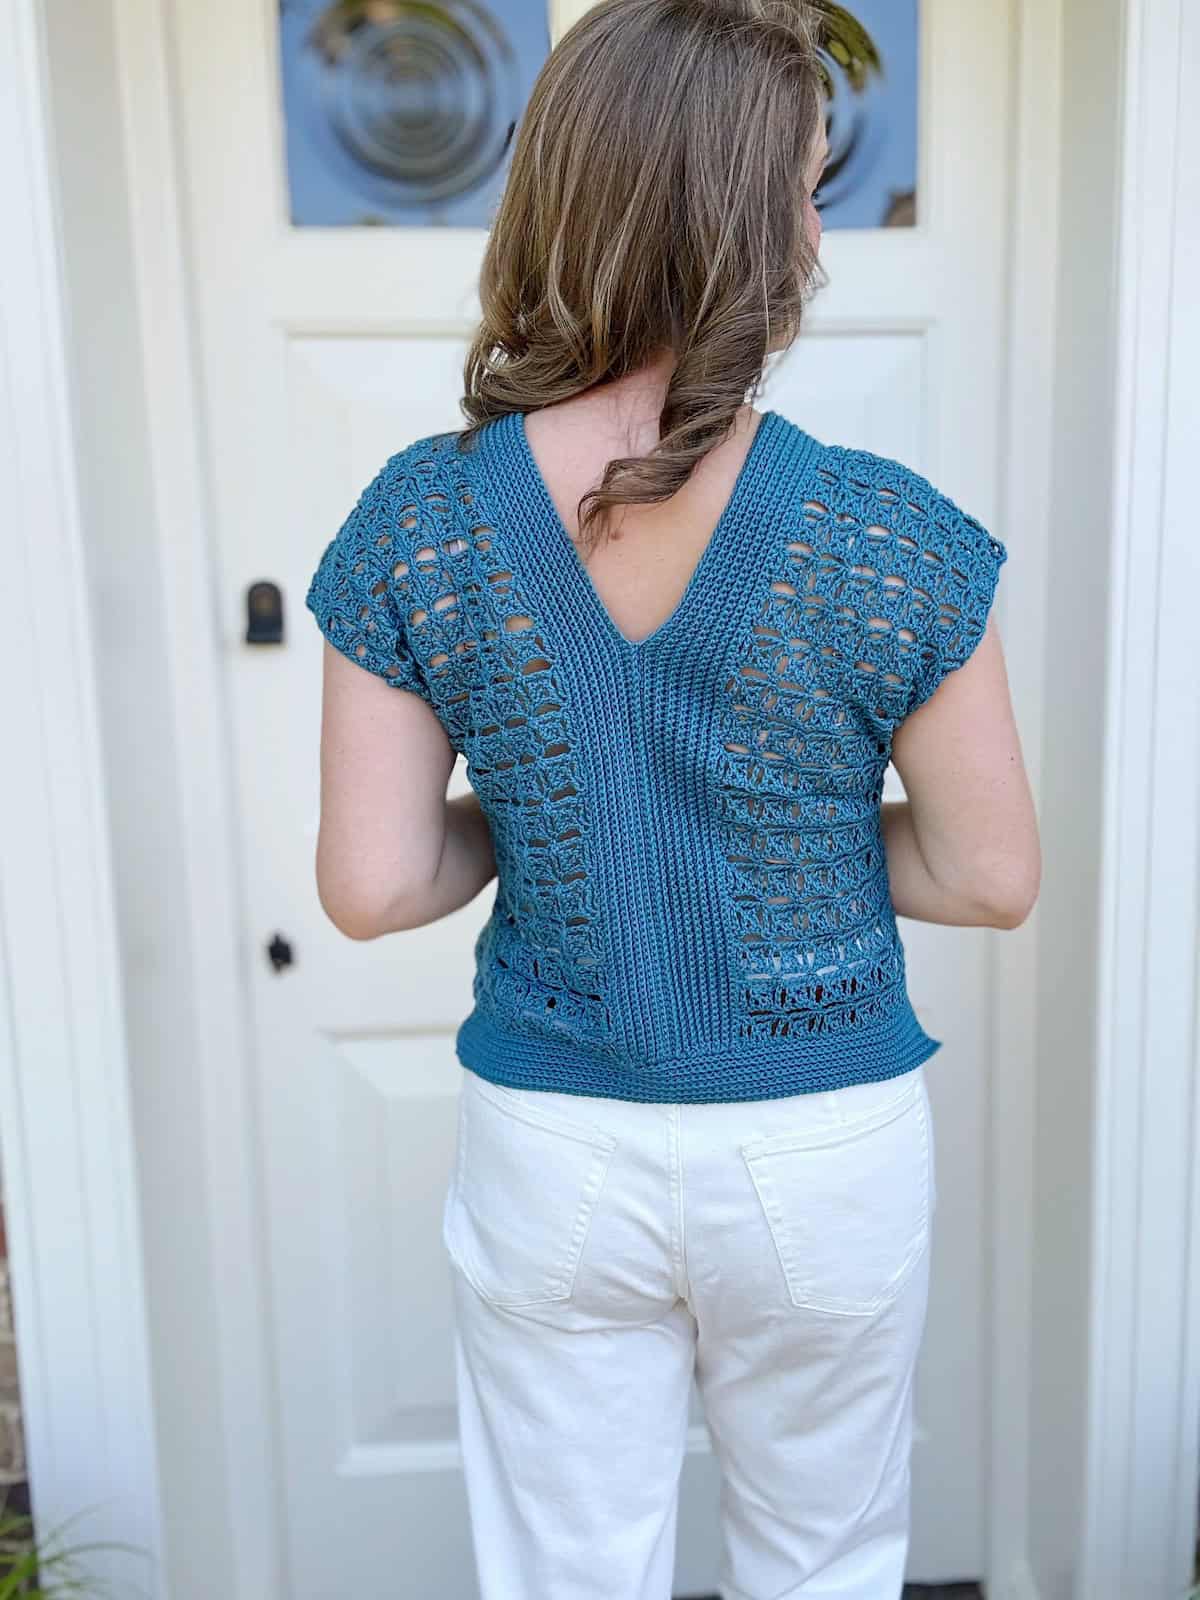 A person with long hair stands facing a white door, wearing a blue crochet lace top with a V-shaped back and short sleeves, paired with white pants.